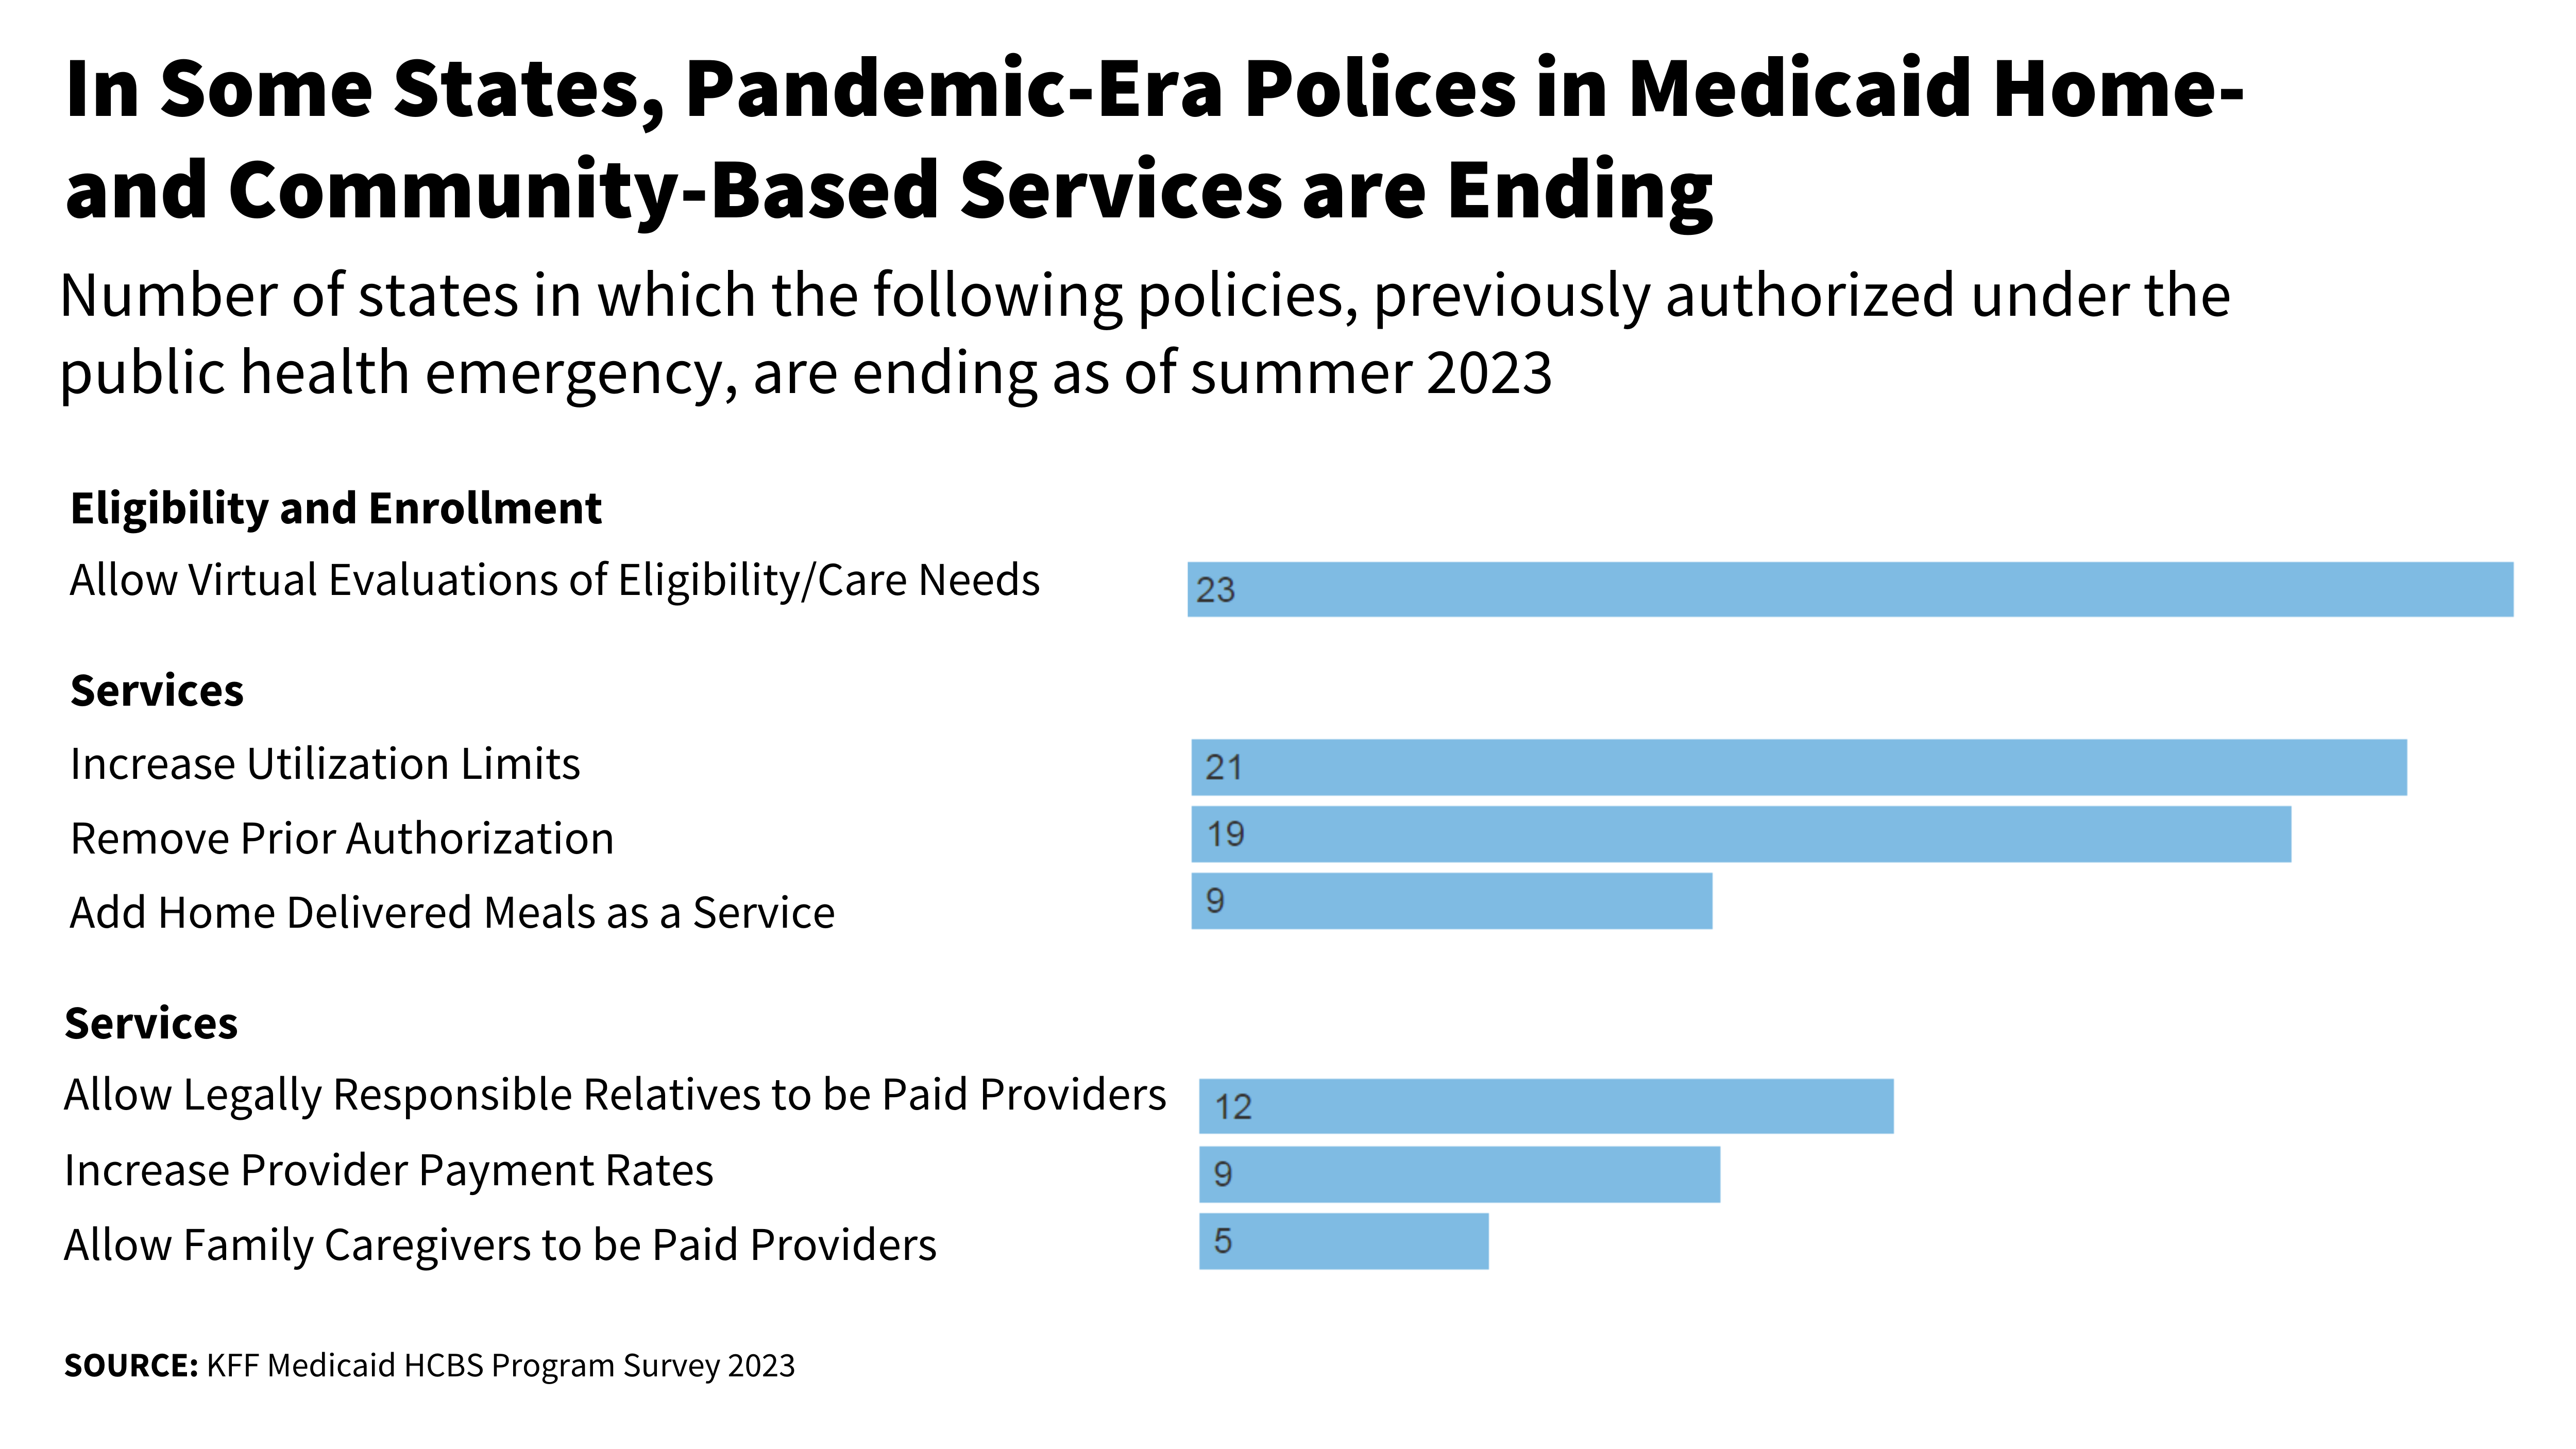 Pandemic-Era Changes to Medicaid Home- and Community-Based Services (HCBS): A Closer Look at Family Caregiver Policies